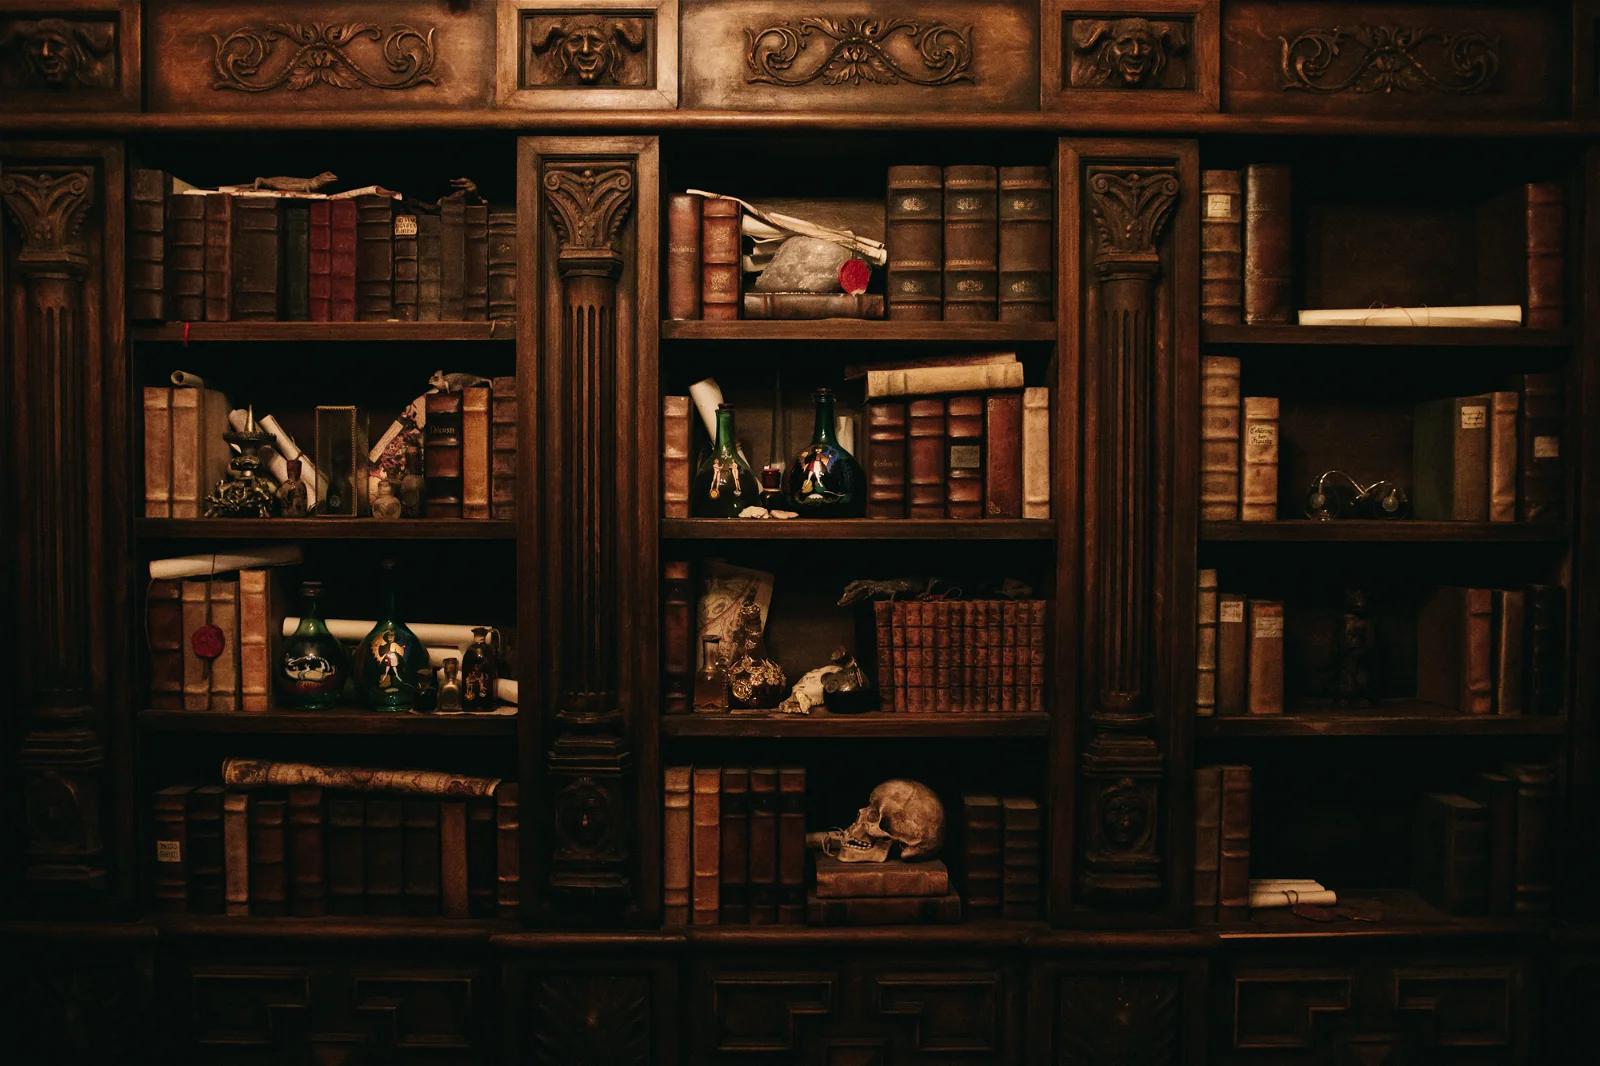 A photo of an old-fashioned wooden bookshelf filled with various antique books, scrolls, and objects, creating a vintage library atmosphere.
